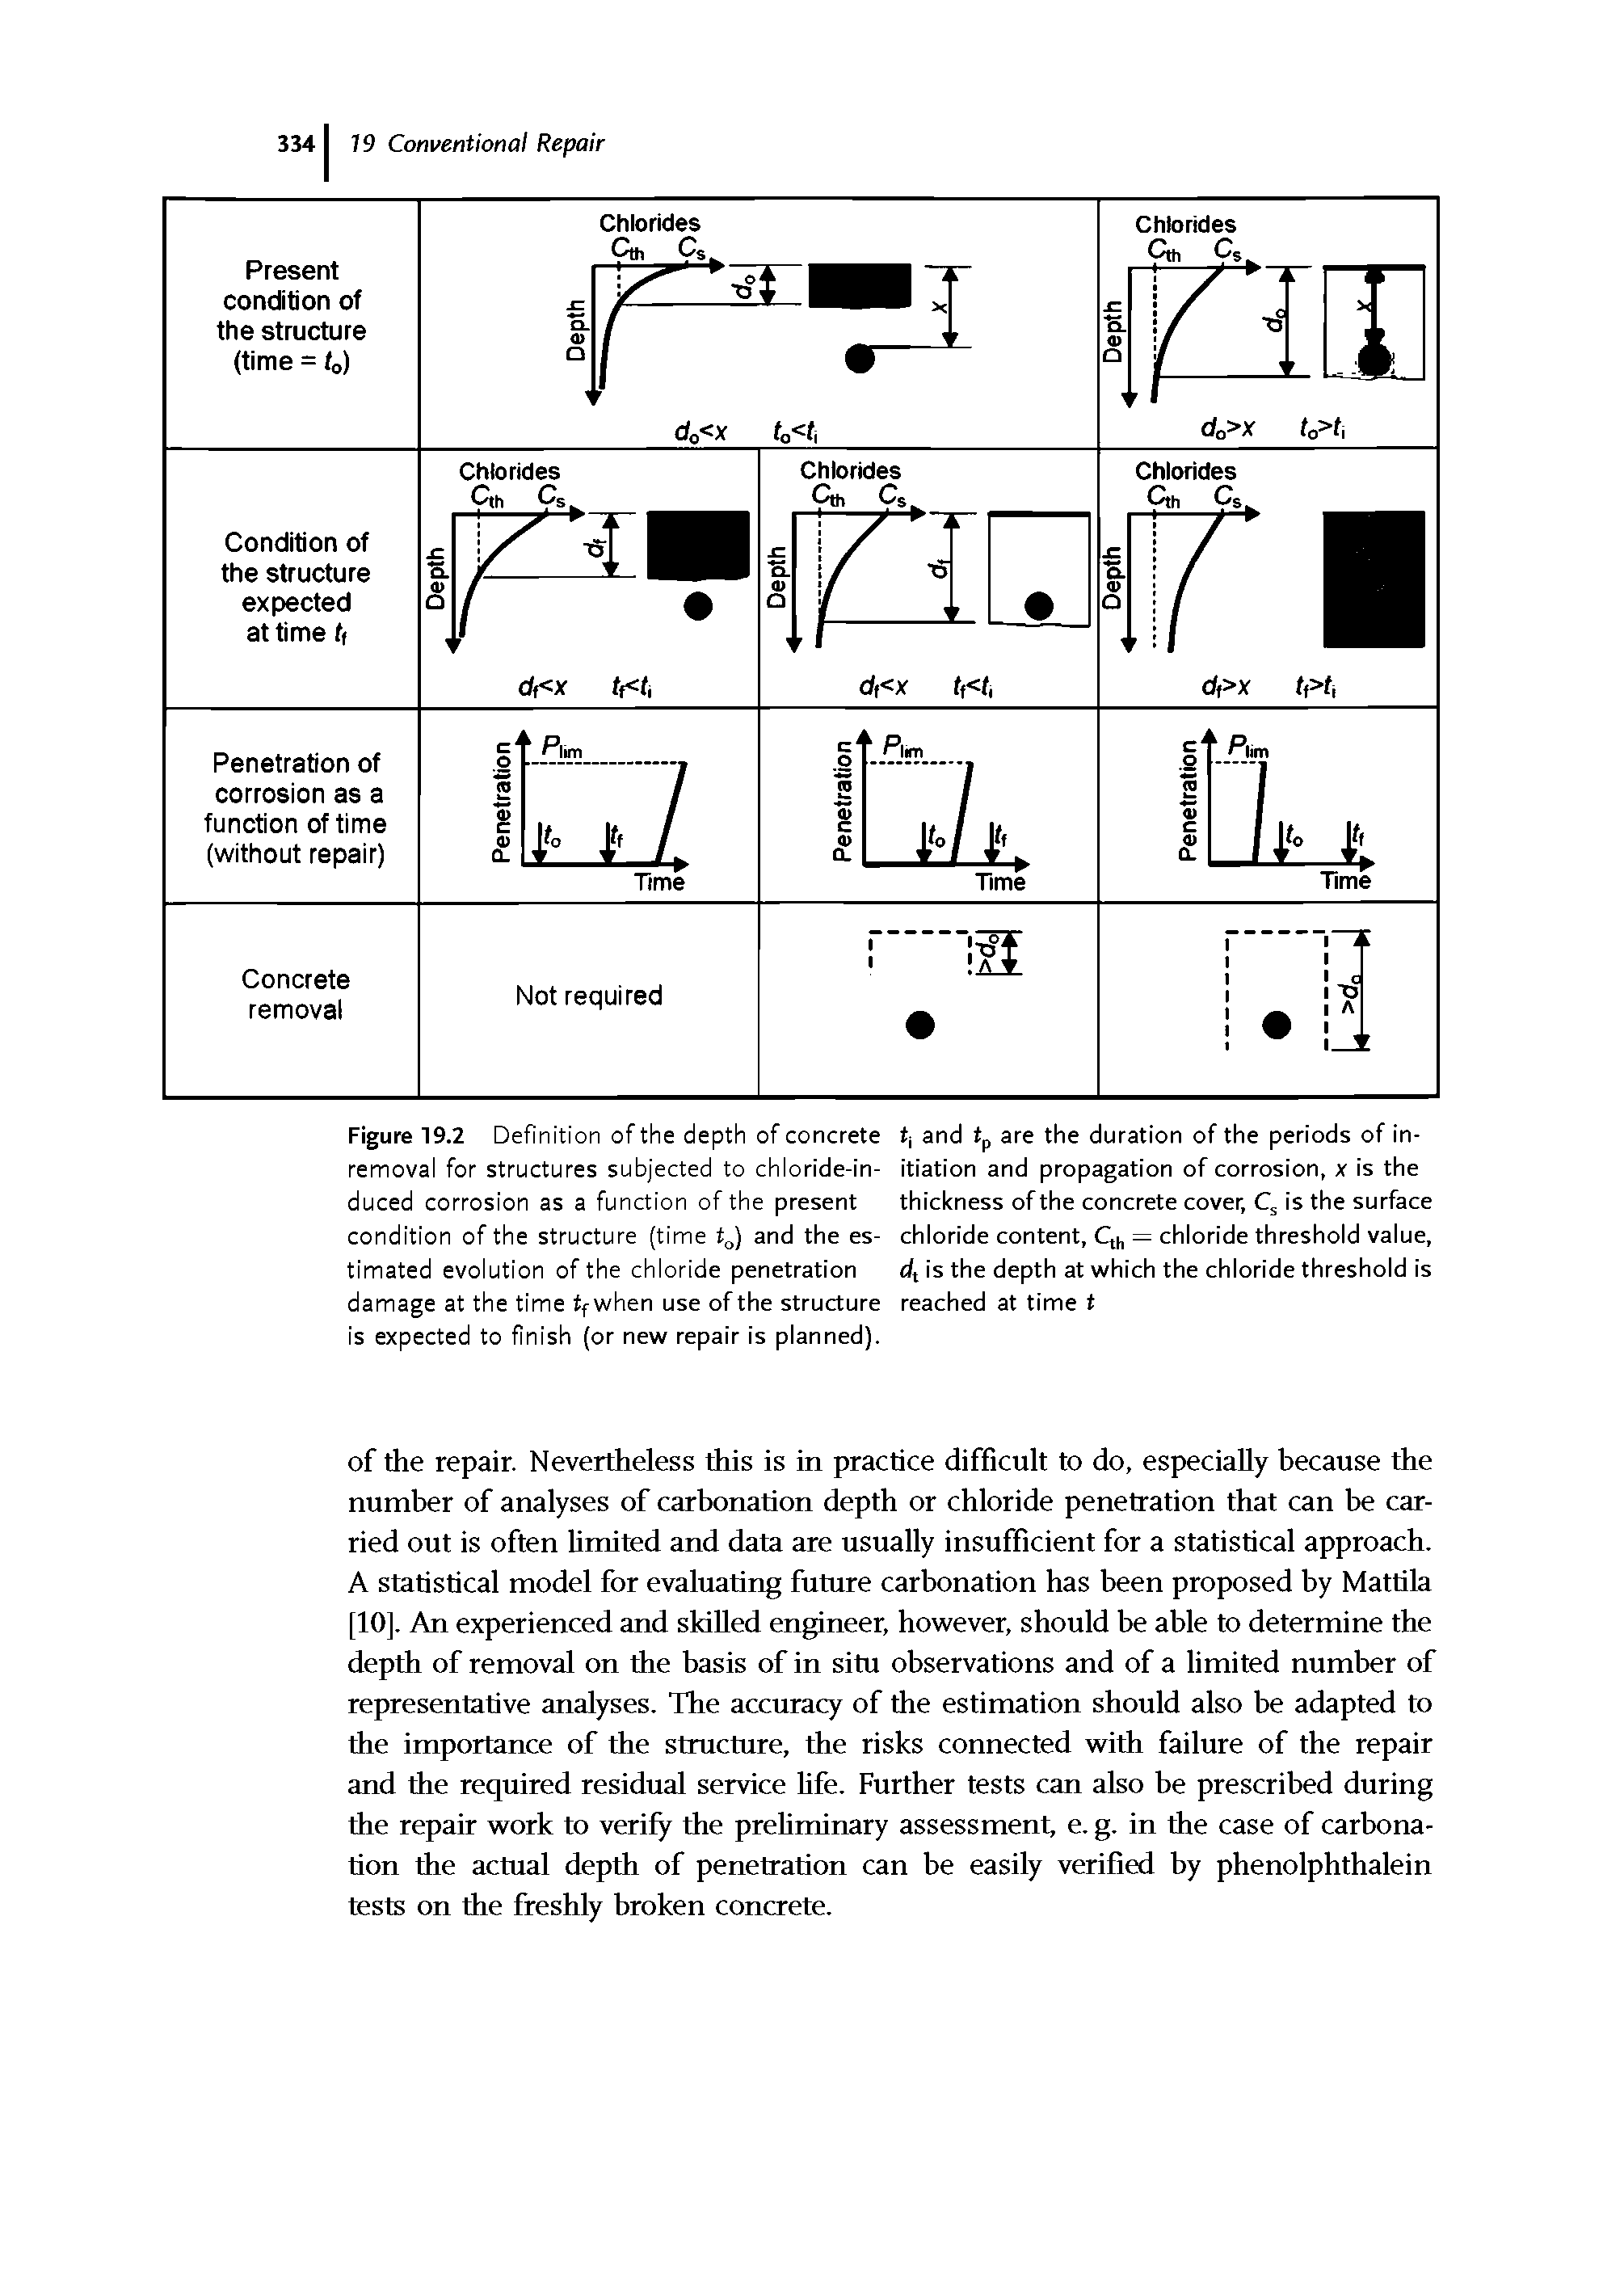 Figure 19.2 Definition of the depth of concrete removal for structures subjected to chloride-induced corrosion as a function of the present condition of the structure (time t ) and the estimated evolution of the chloride penetration damage at the time if when use of the structure is expected to finish (or new repair is planned).